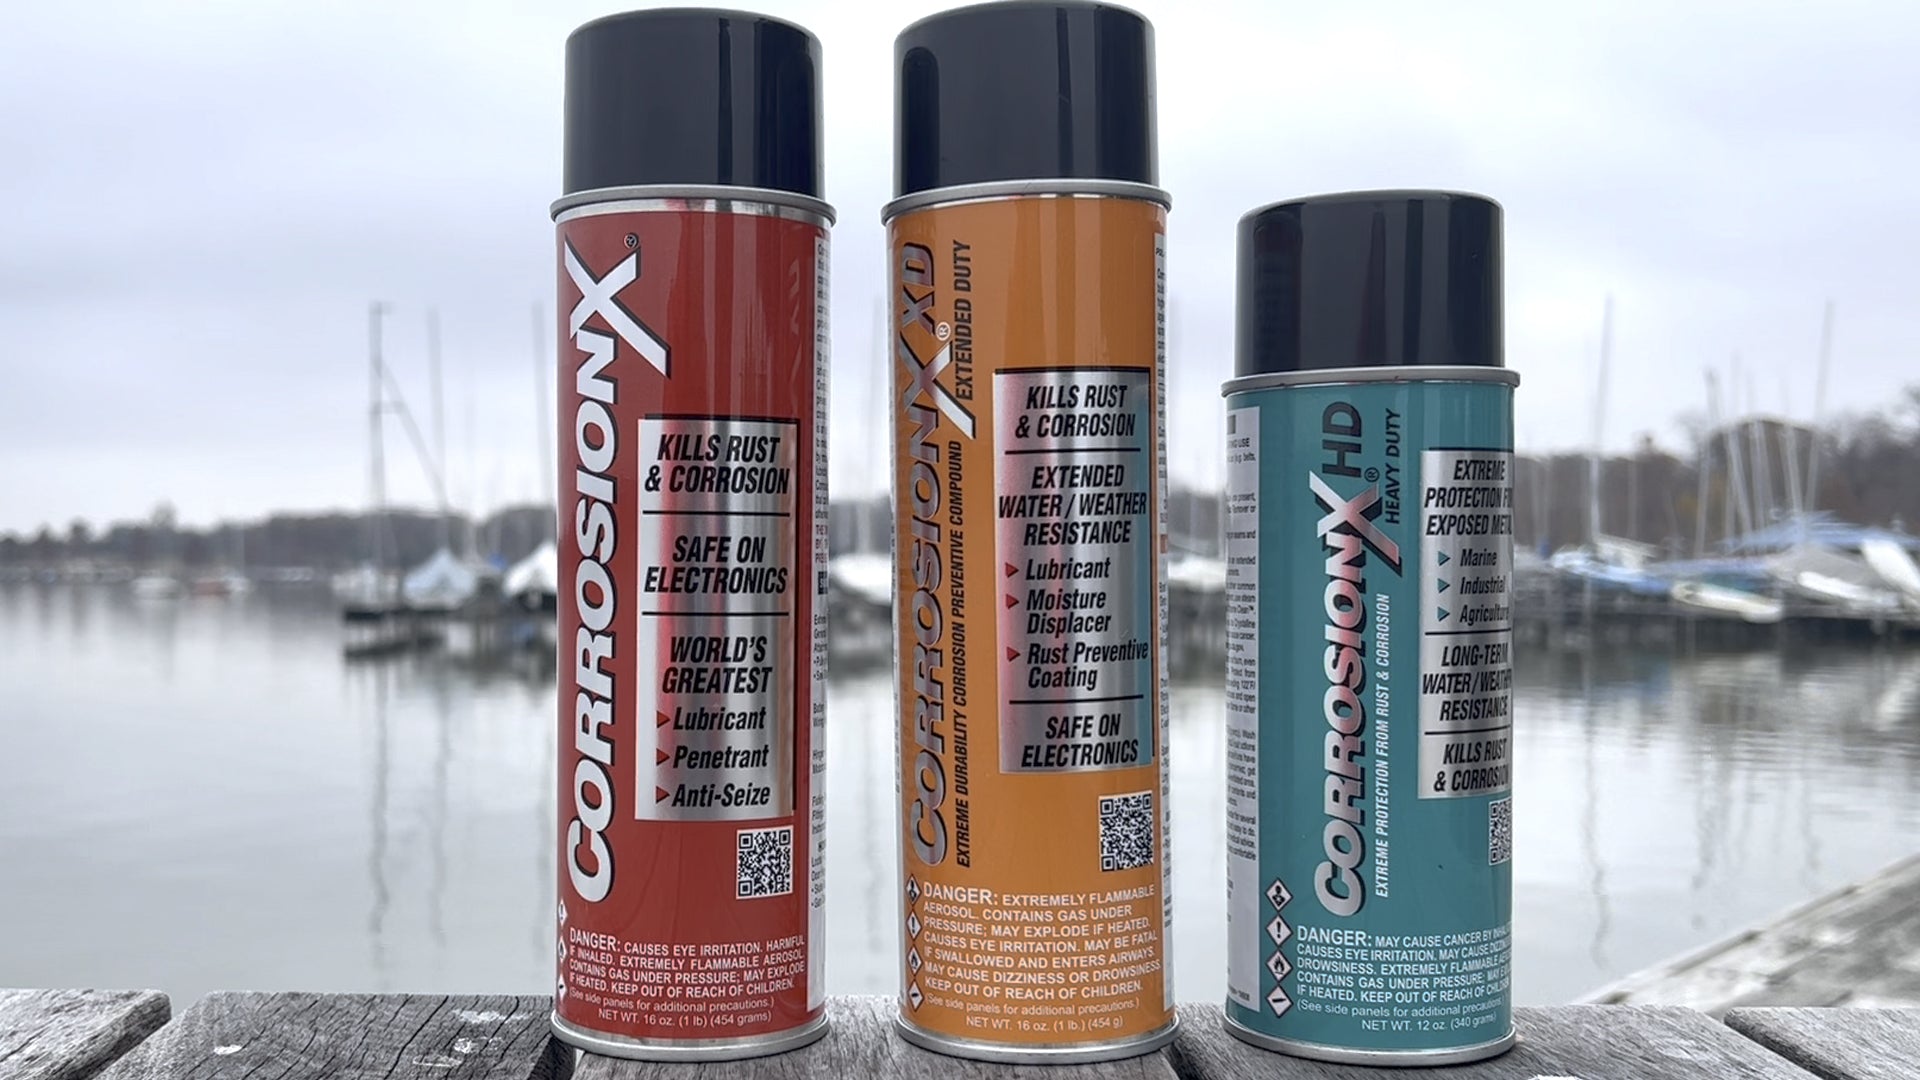 What is the difference between CorrosionX (red) and CorrosionX Heavy Duty (green)?